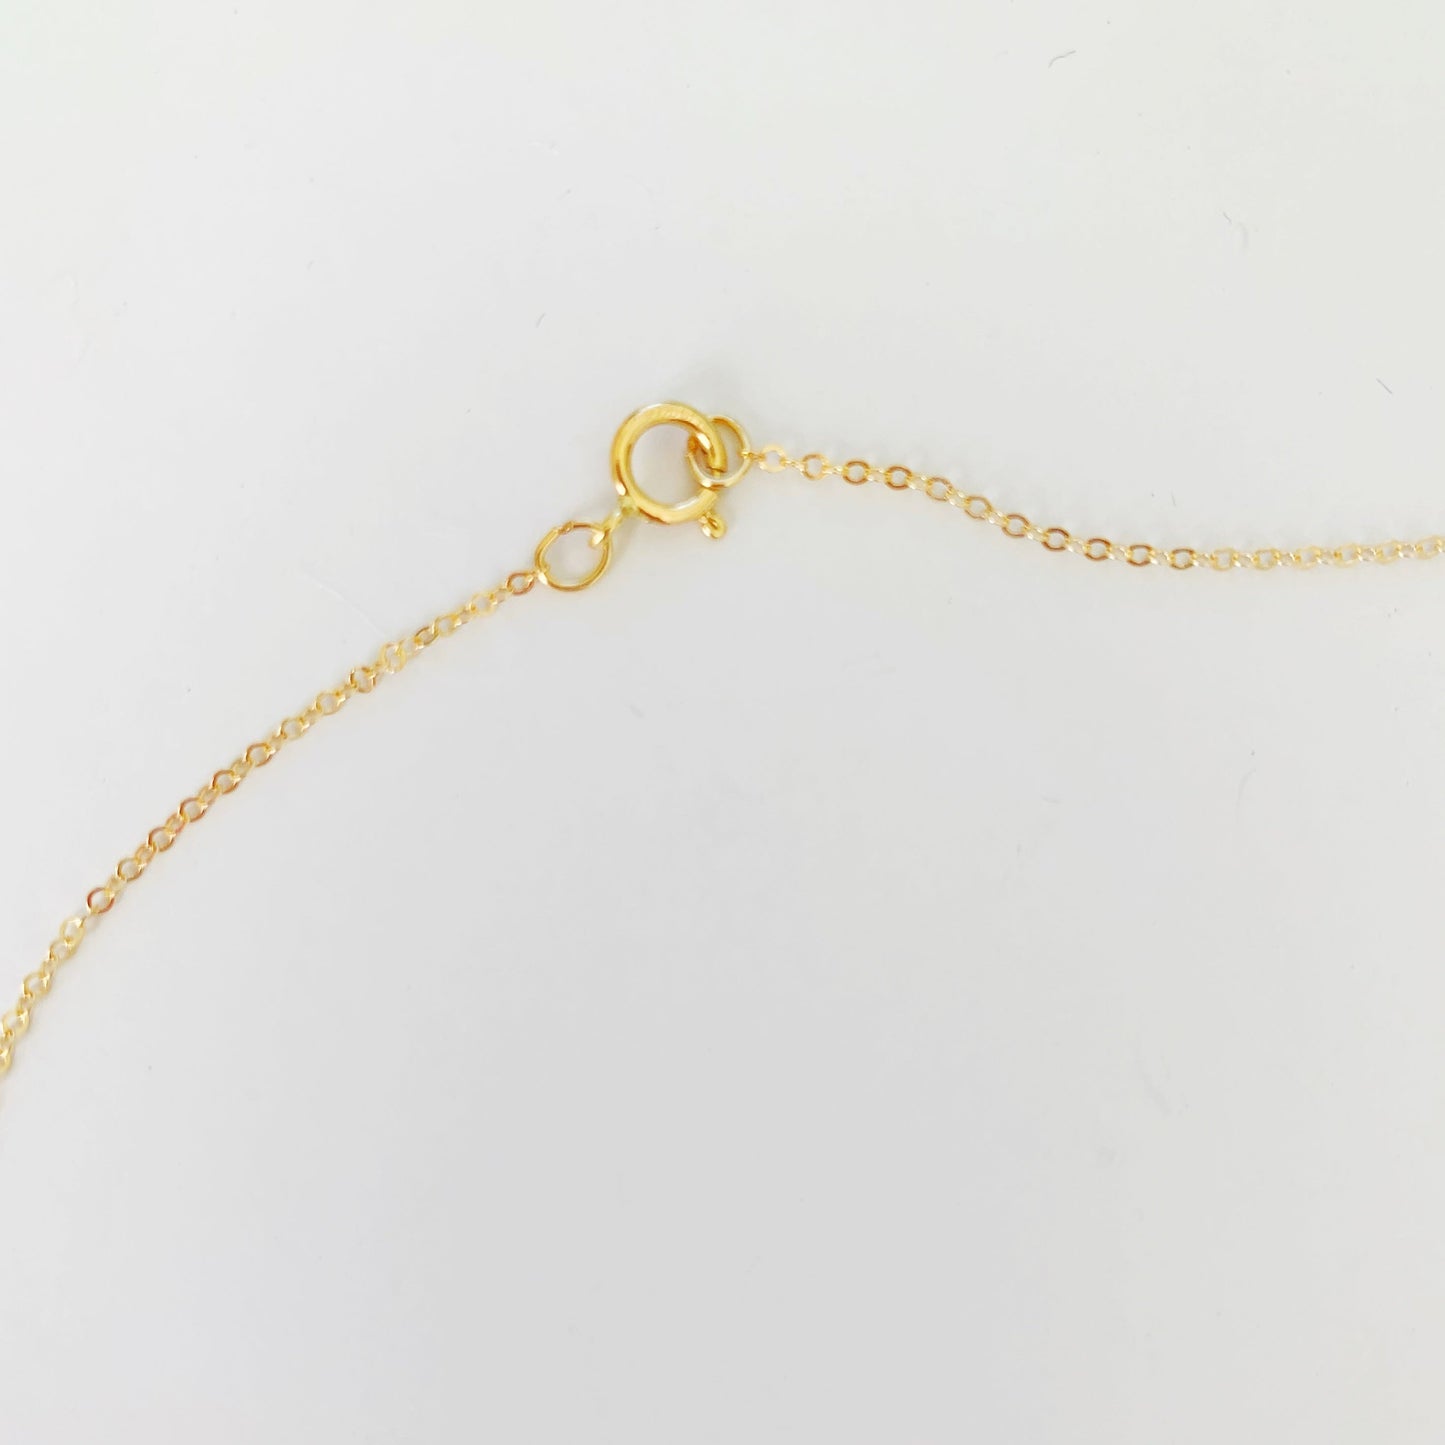 The back of the newport pearl necklace in gold filled is clasped with a spring ring photographed here on a white surface